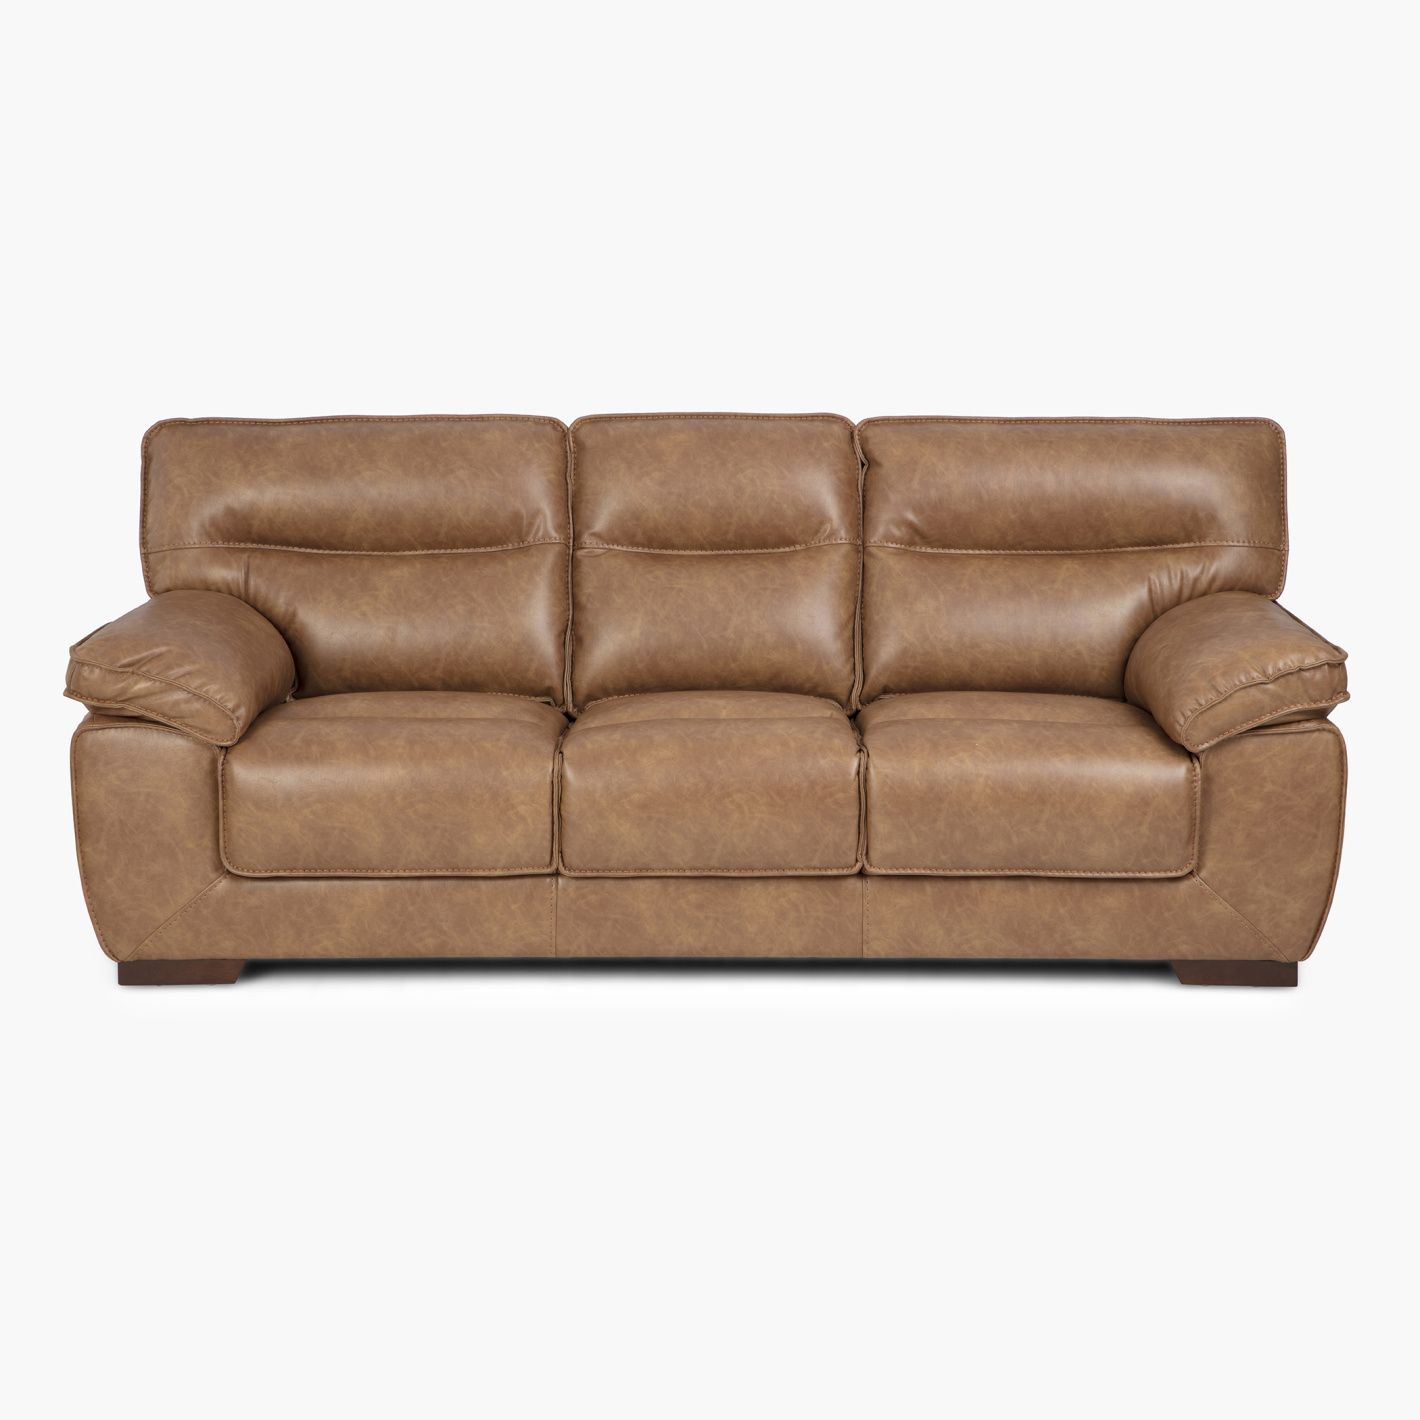 Walker Faux Leather 3 Seater Sofa | Brown For Traditional 3 Seater Faux Leather Sofas (Gallery 1 of 20)